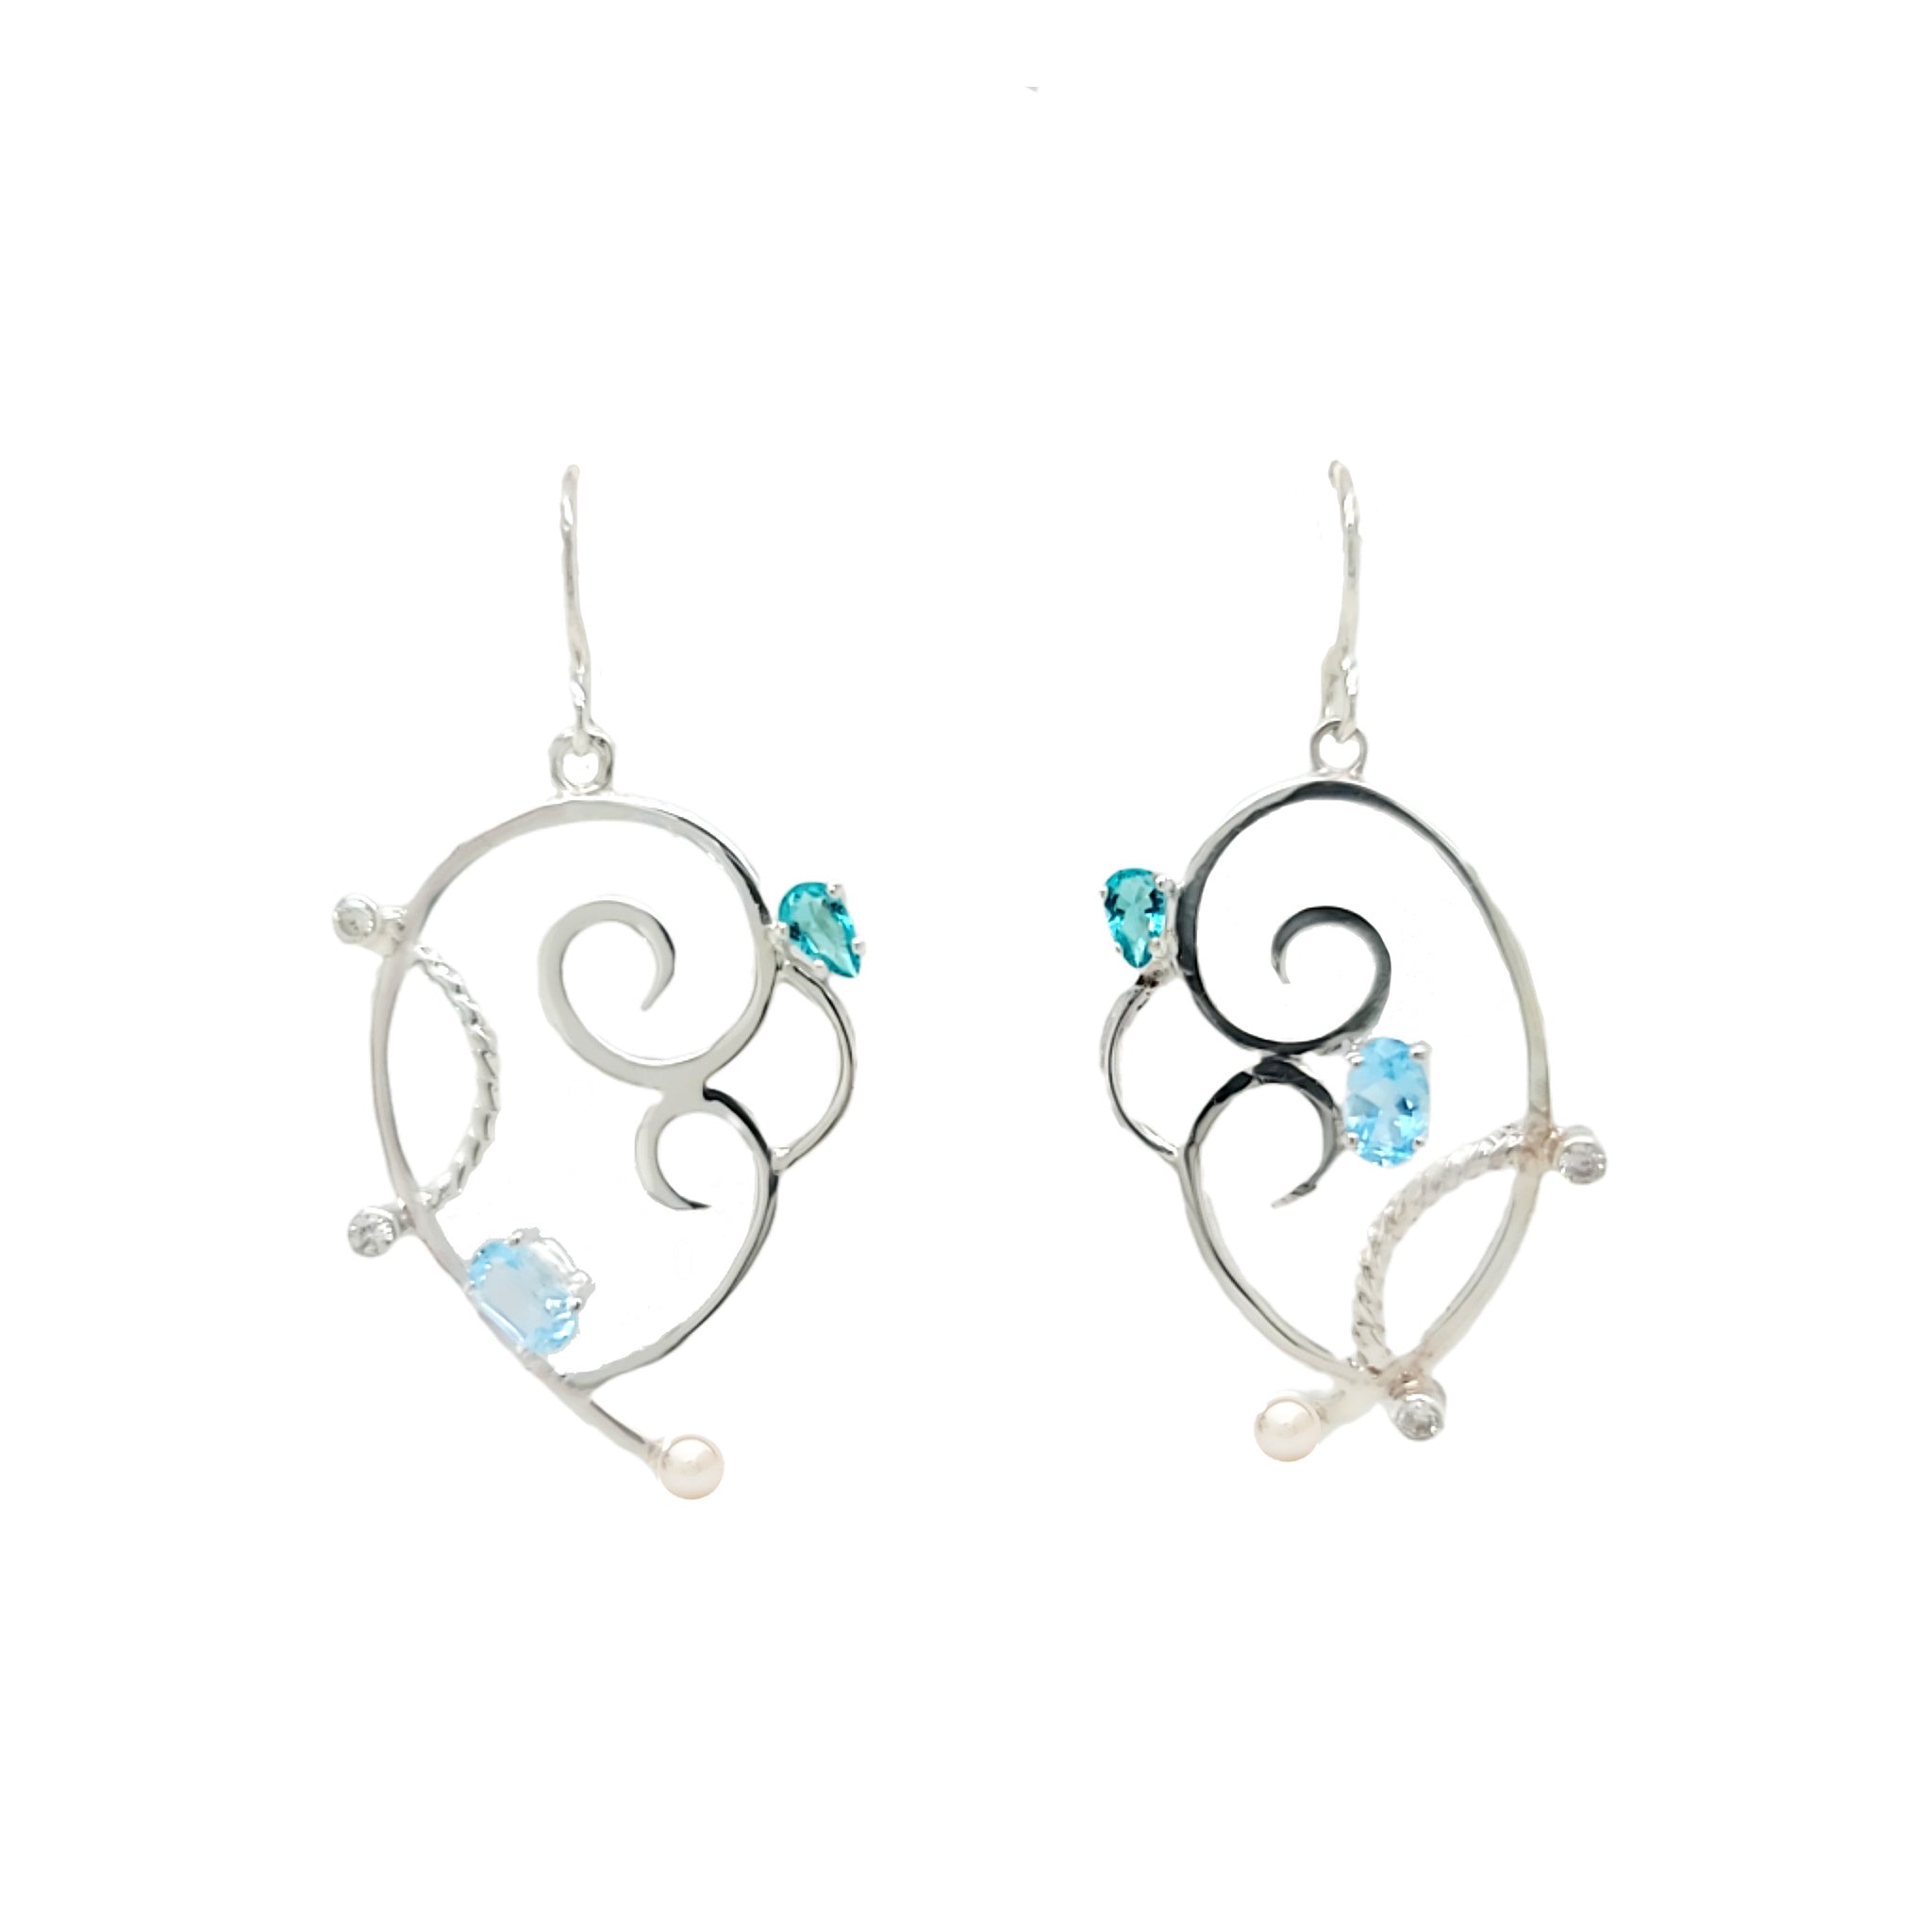 Asymmetric Sterling Silver earrings with Blue Topaz, Cubic Zirconia and Freshwater Pearls.